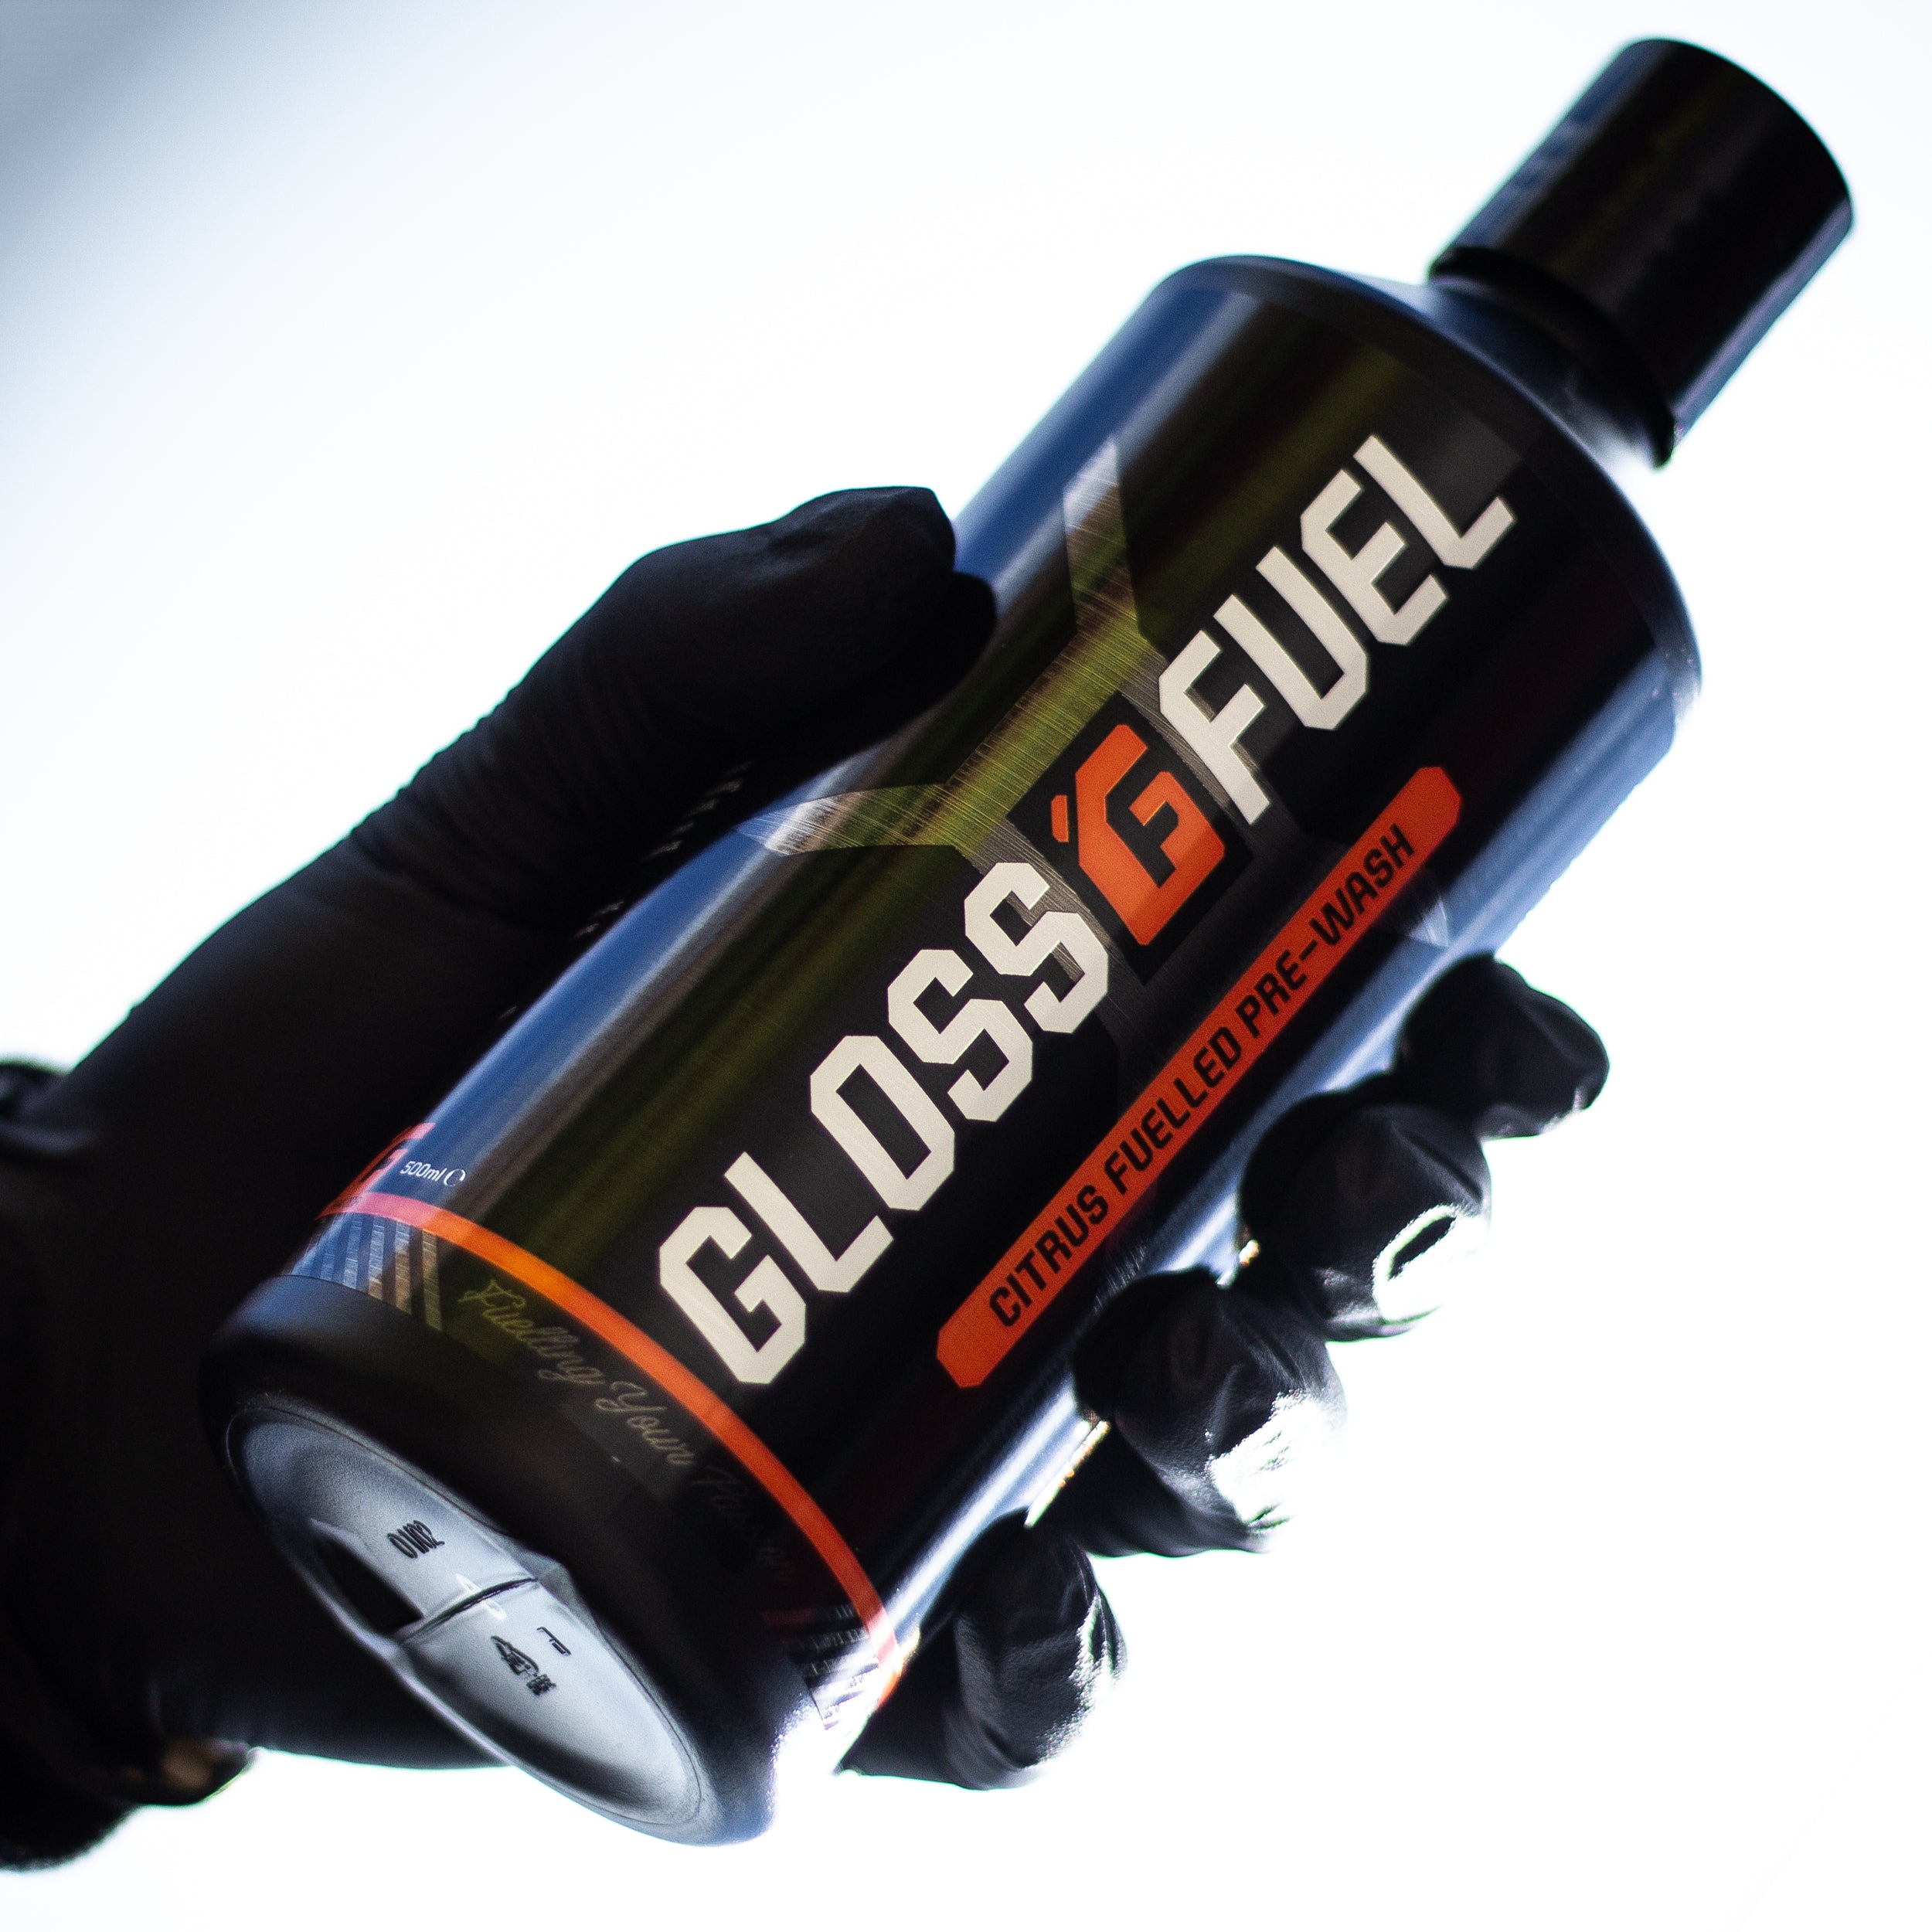 Gloss Fuel Citrus Fuelled Pre-Wash - 500ml Bottle in Gloved Hand